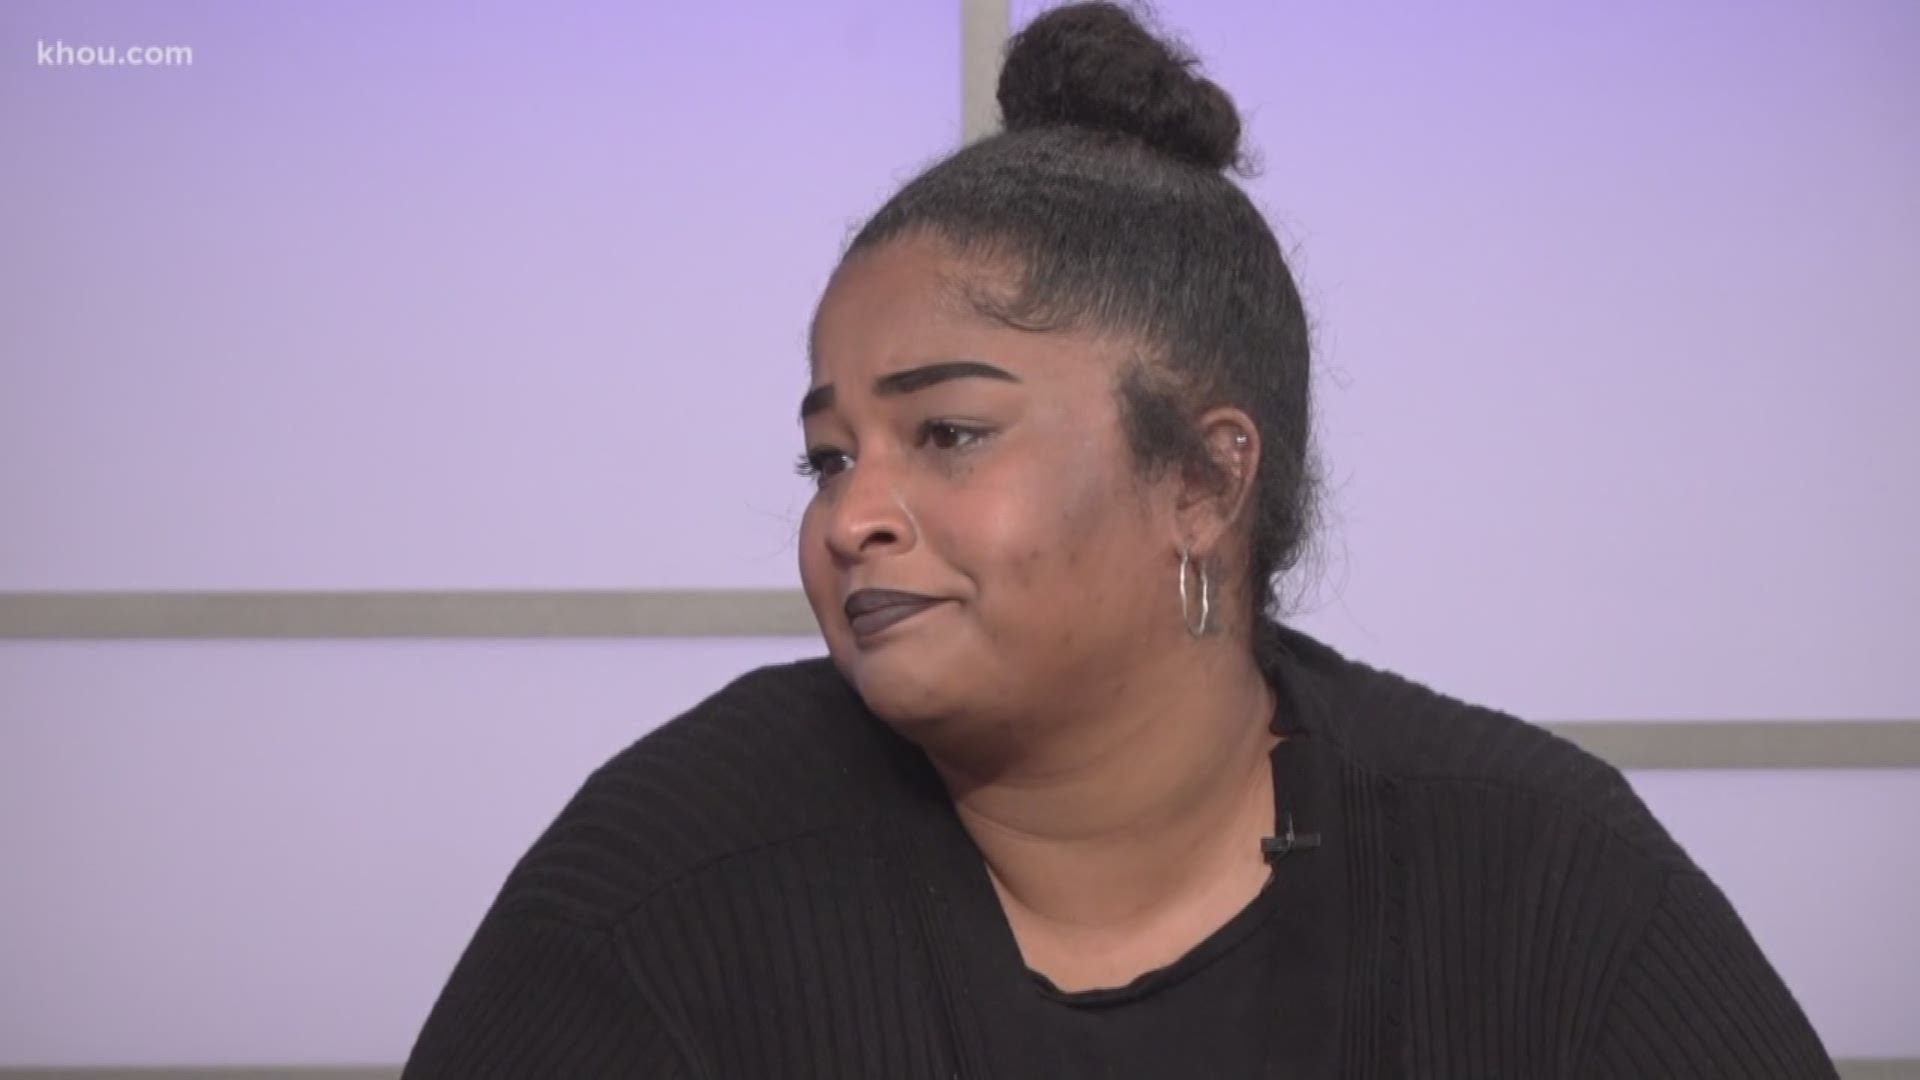 In an emotional interview with KHOU 11 Anchor Len Cannon, Brittany Bowens answered some tough questions about her daughter’s disappearance, her ex-fiance Derion Vence and whether she thinks he did something to Maleah.